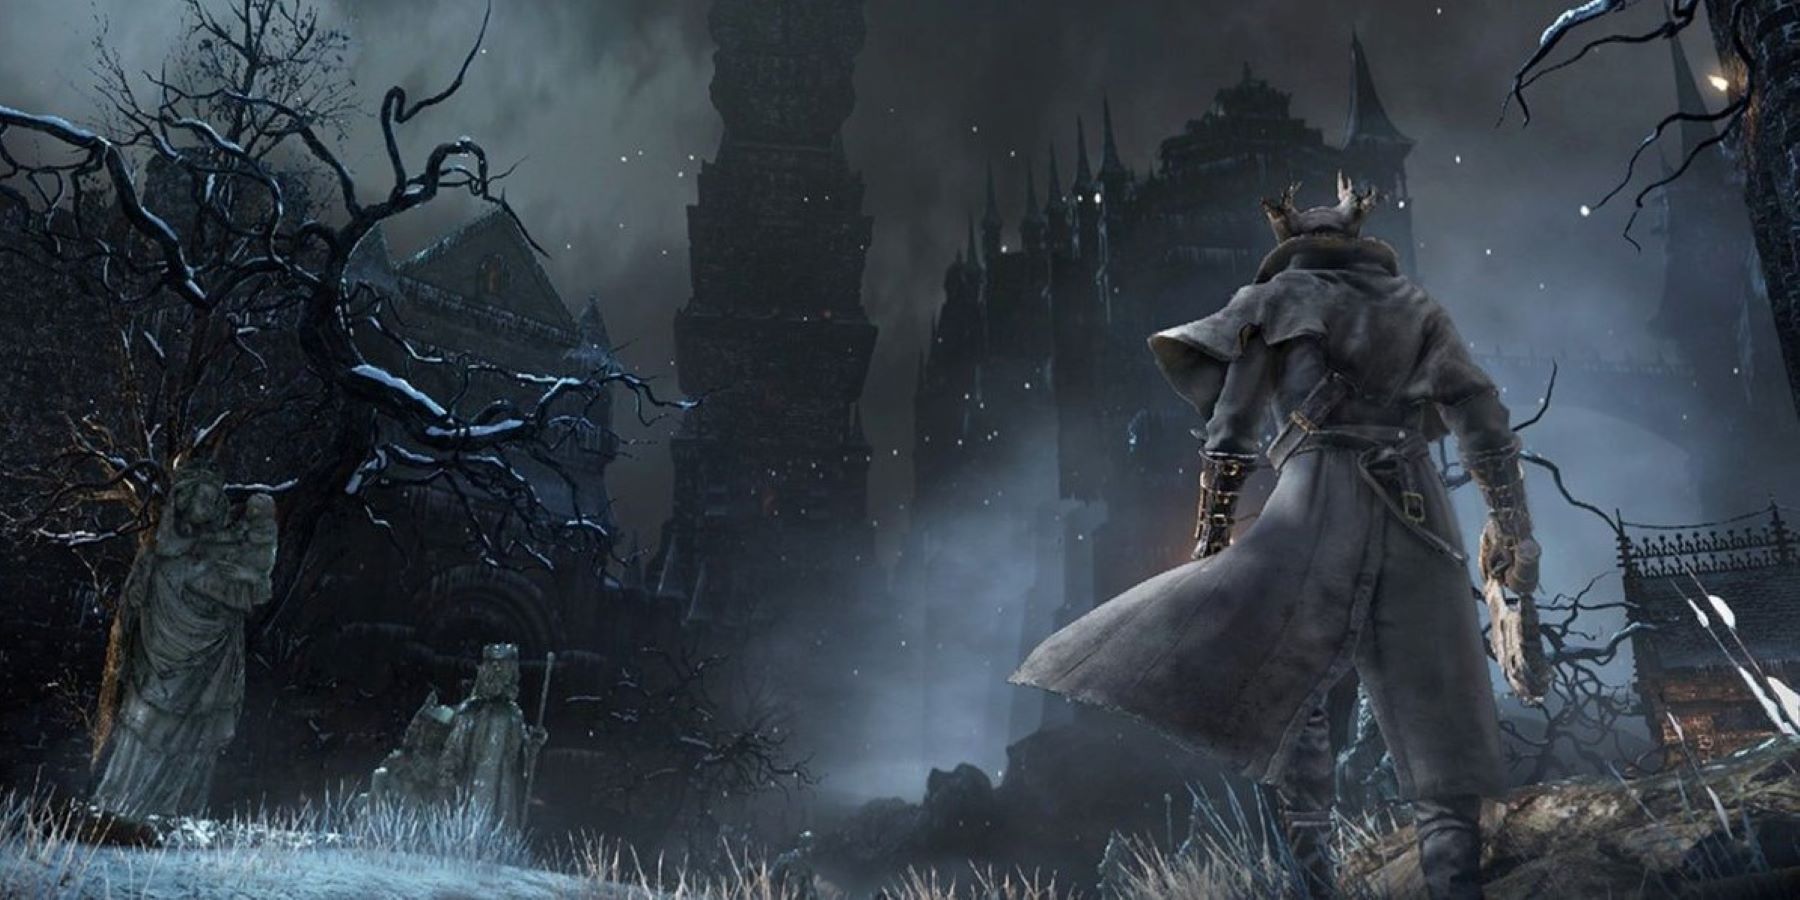 The Hunter standing in a sinister and dark location in Bloodborne